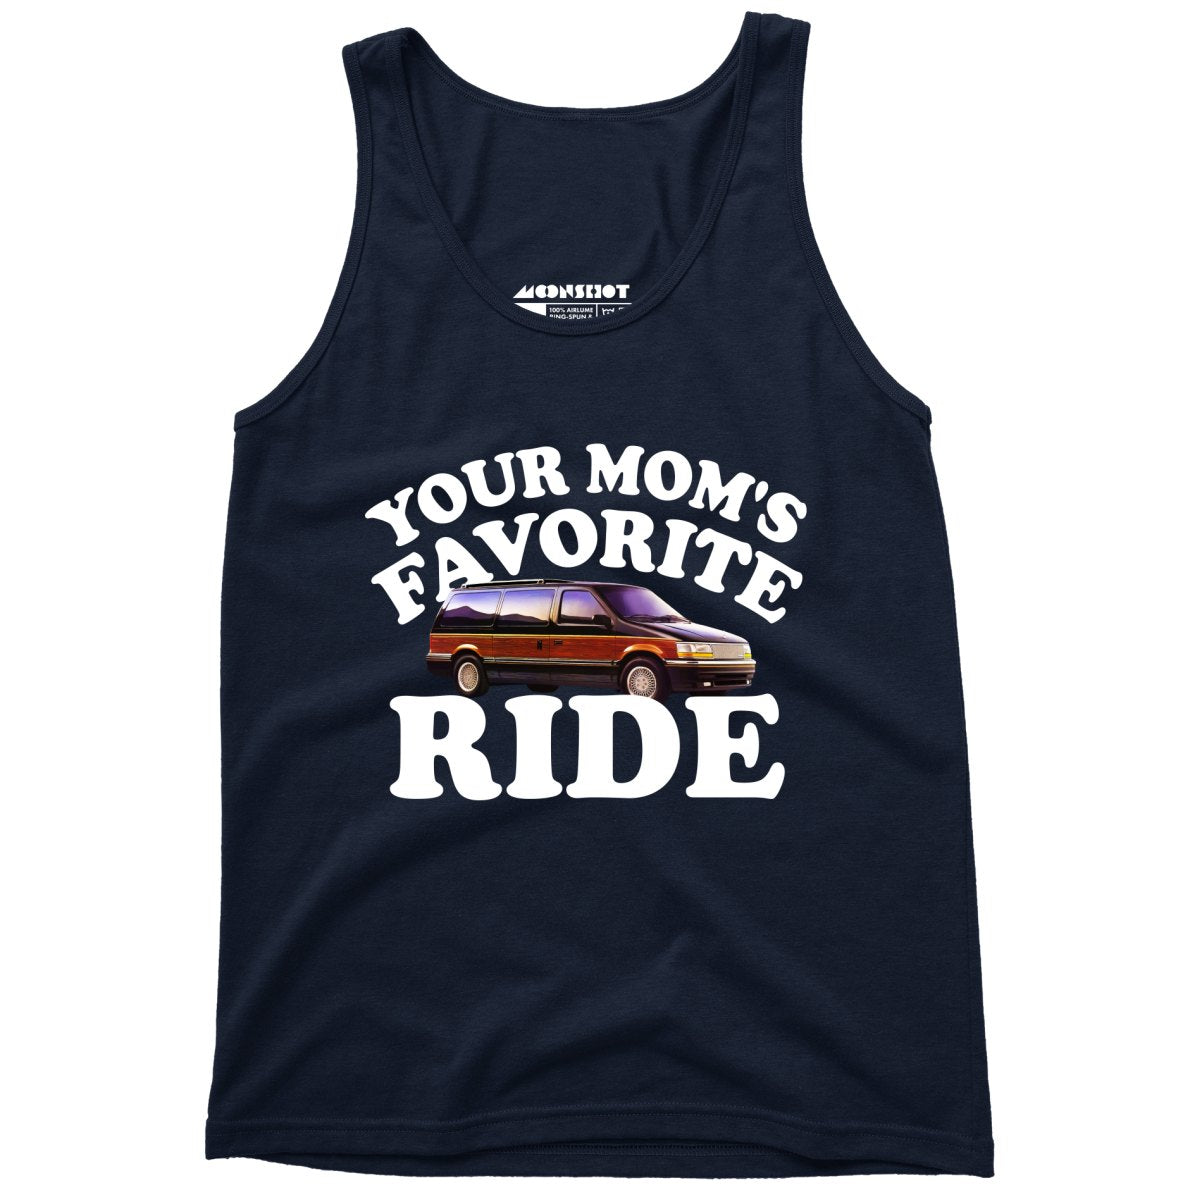 Your Mom's Favorite Ride - Unisex Tank Top